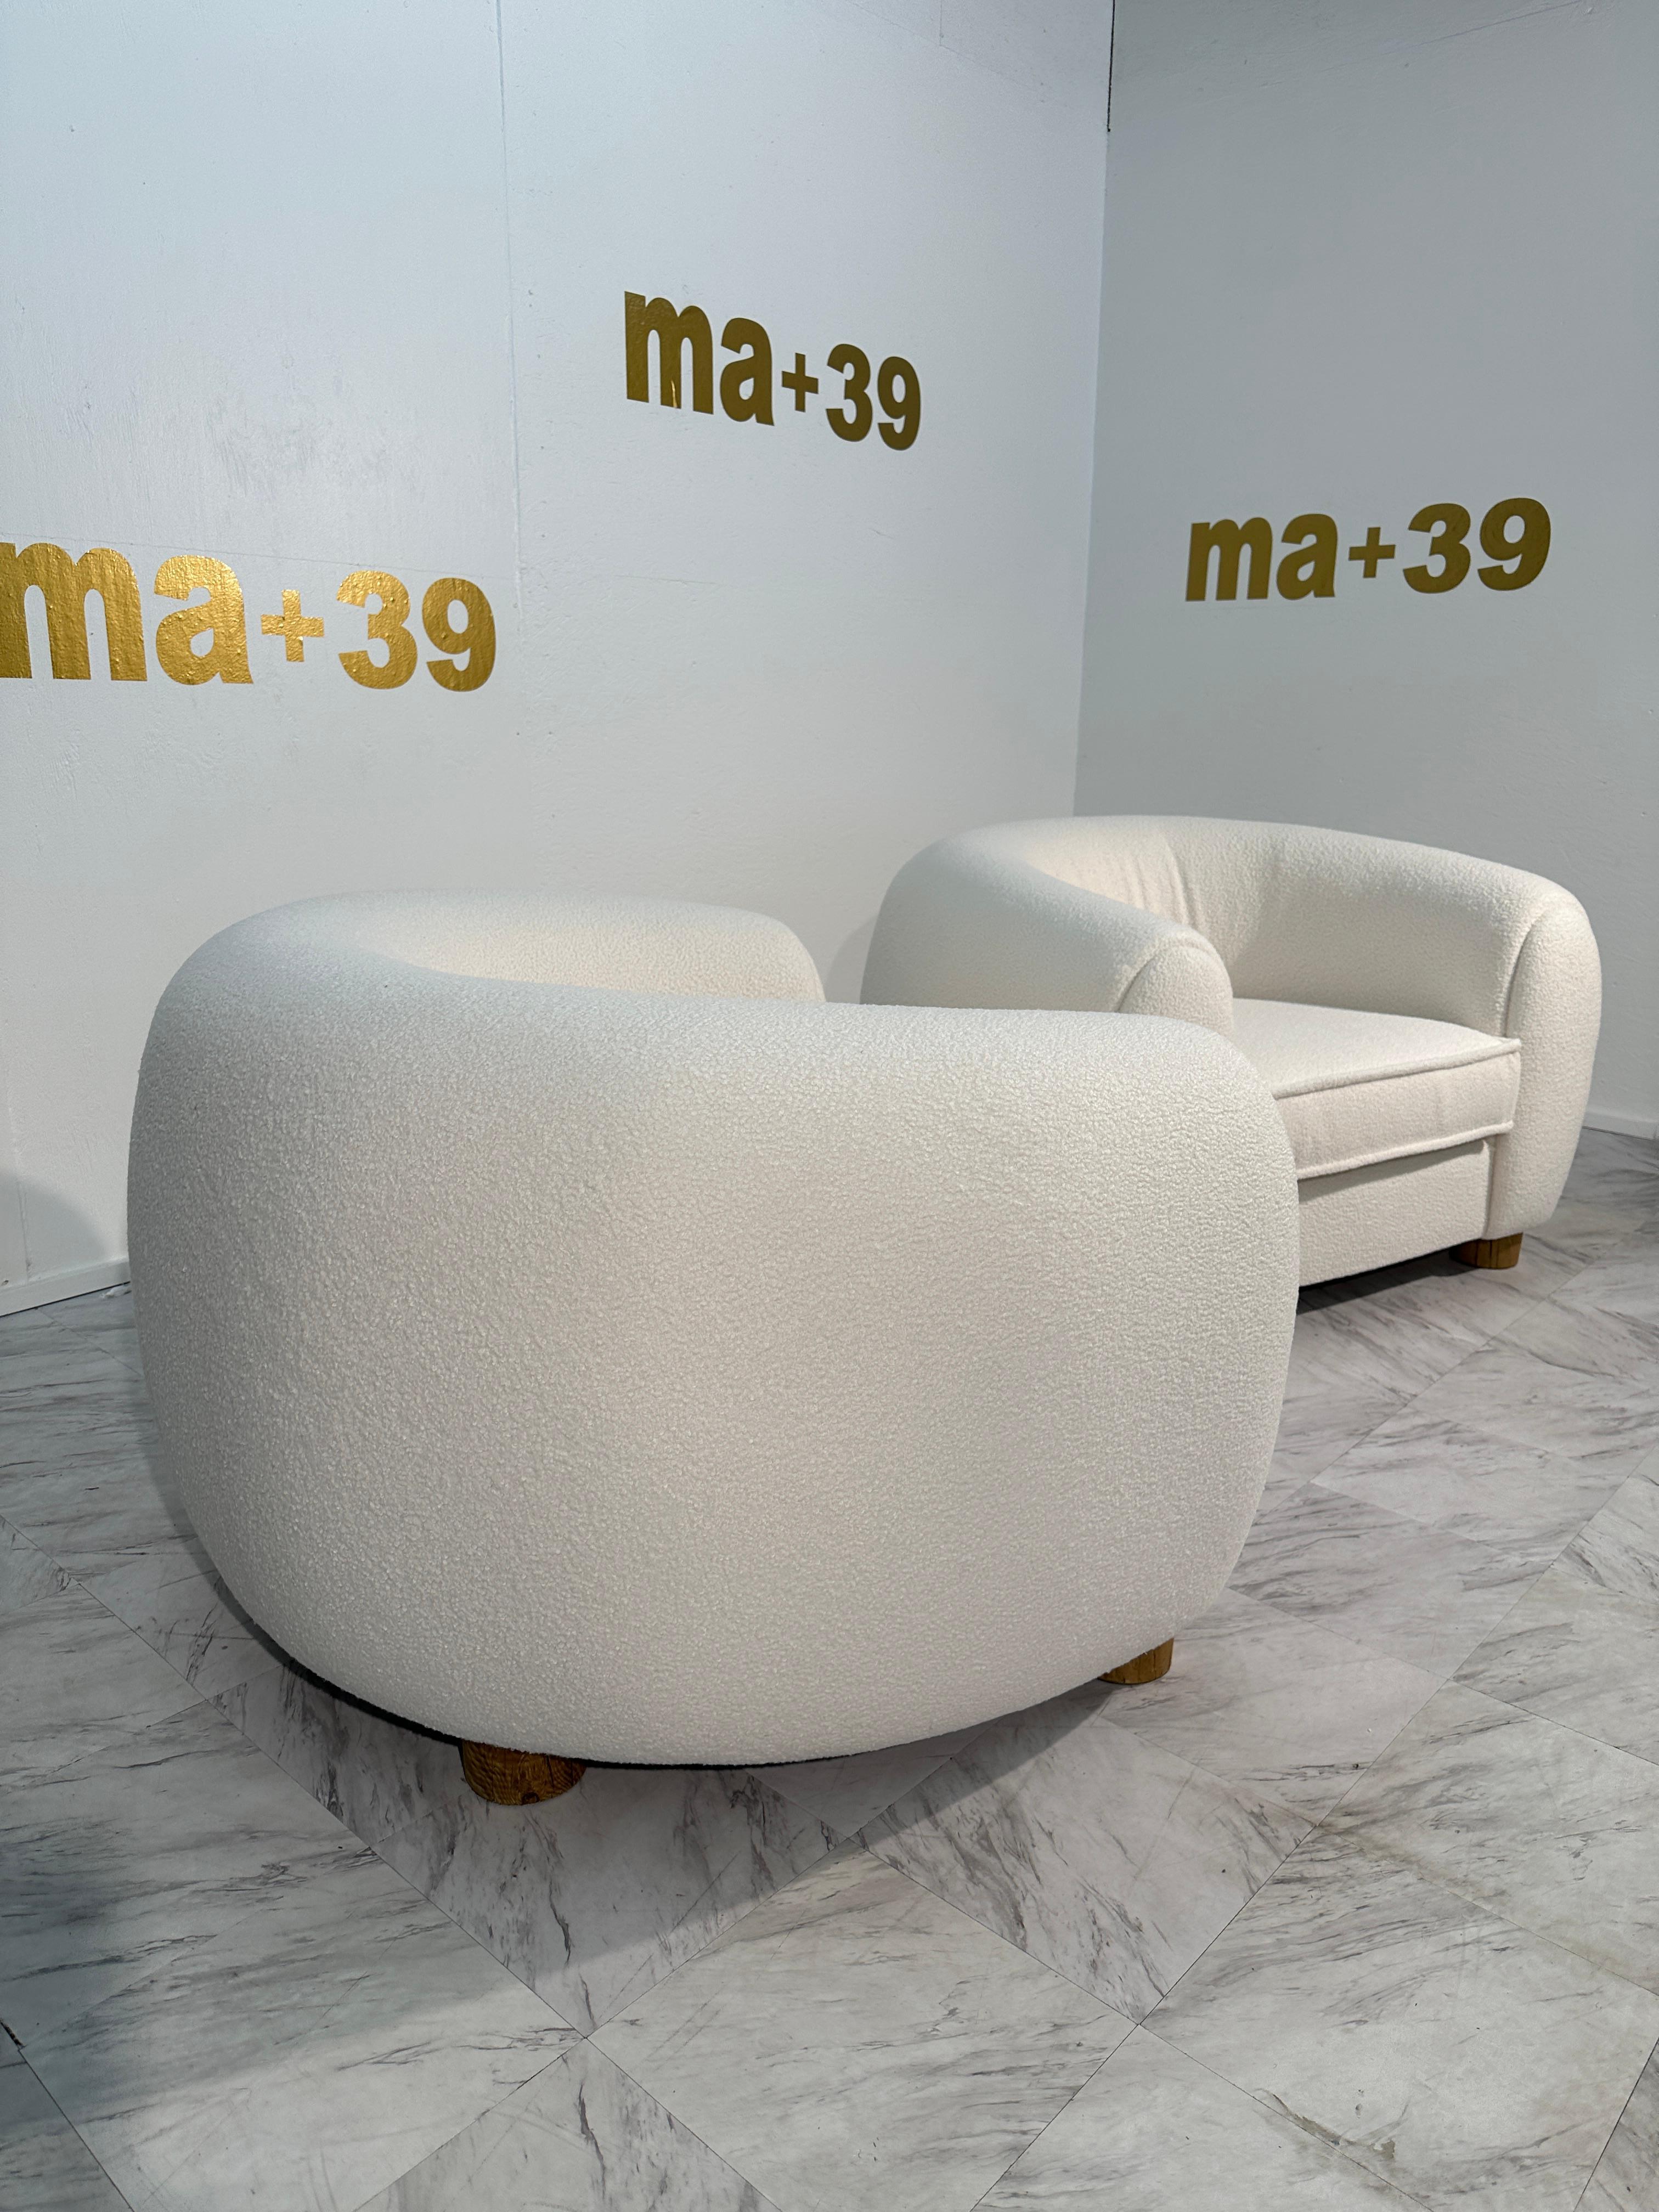 Step into the timeless embrace of design history with this exquisite Pair of 2 Vintage Mid Century Polar Armchairs by Jean Royère, crafted in the iconic 1960s. Royère's unmistakable touch is evident in the organic curves and sculptural lines of